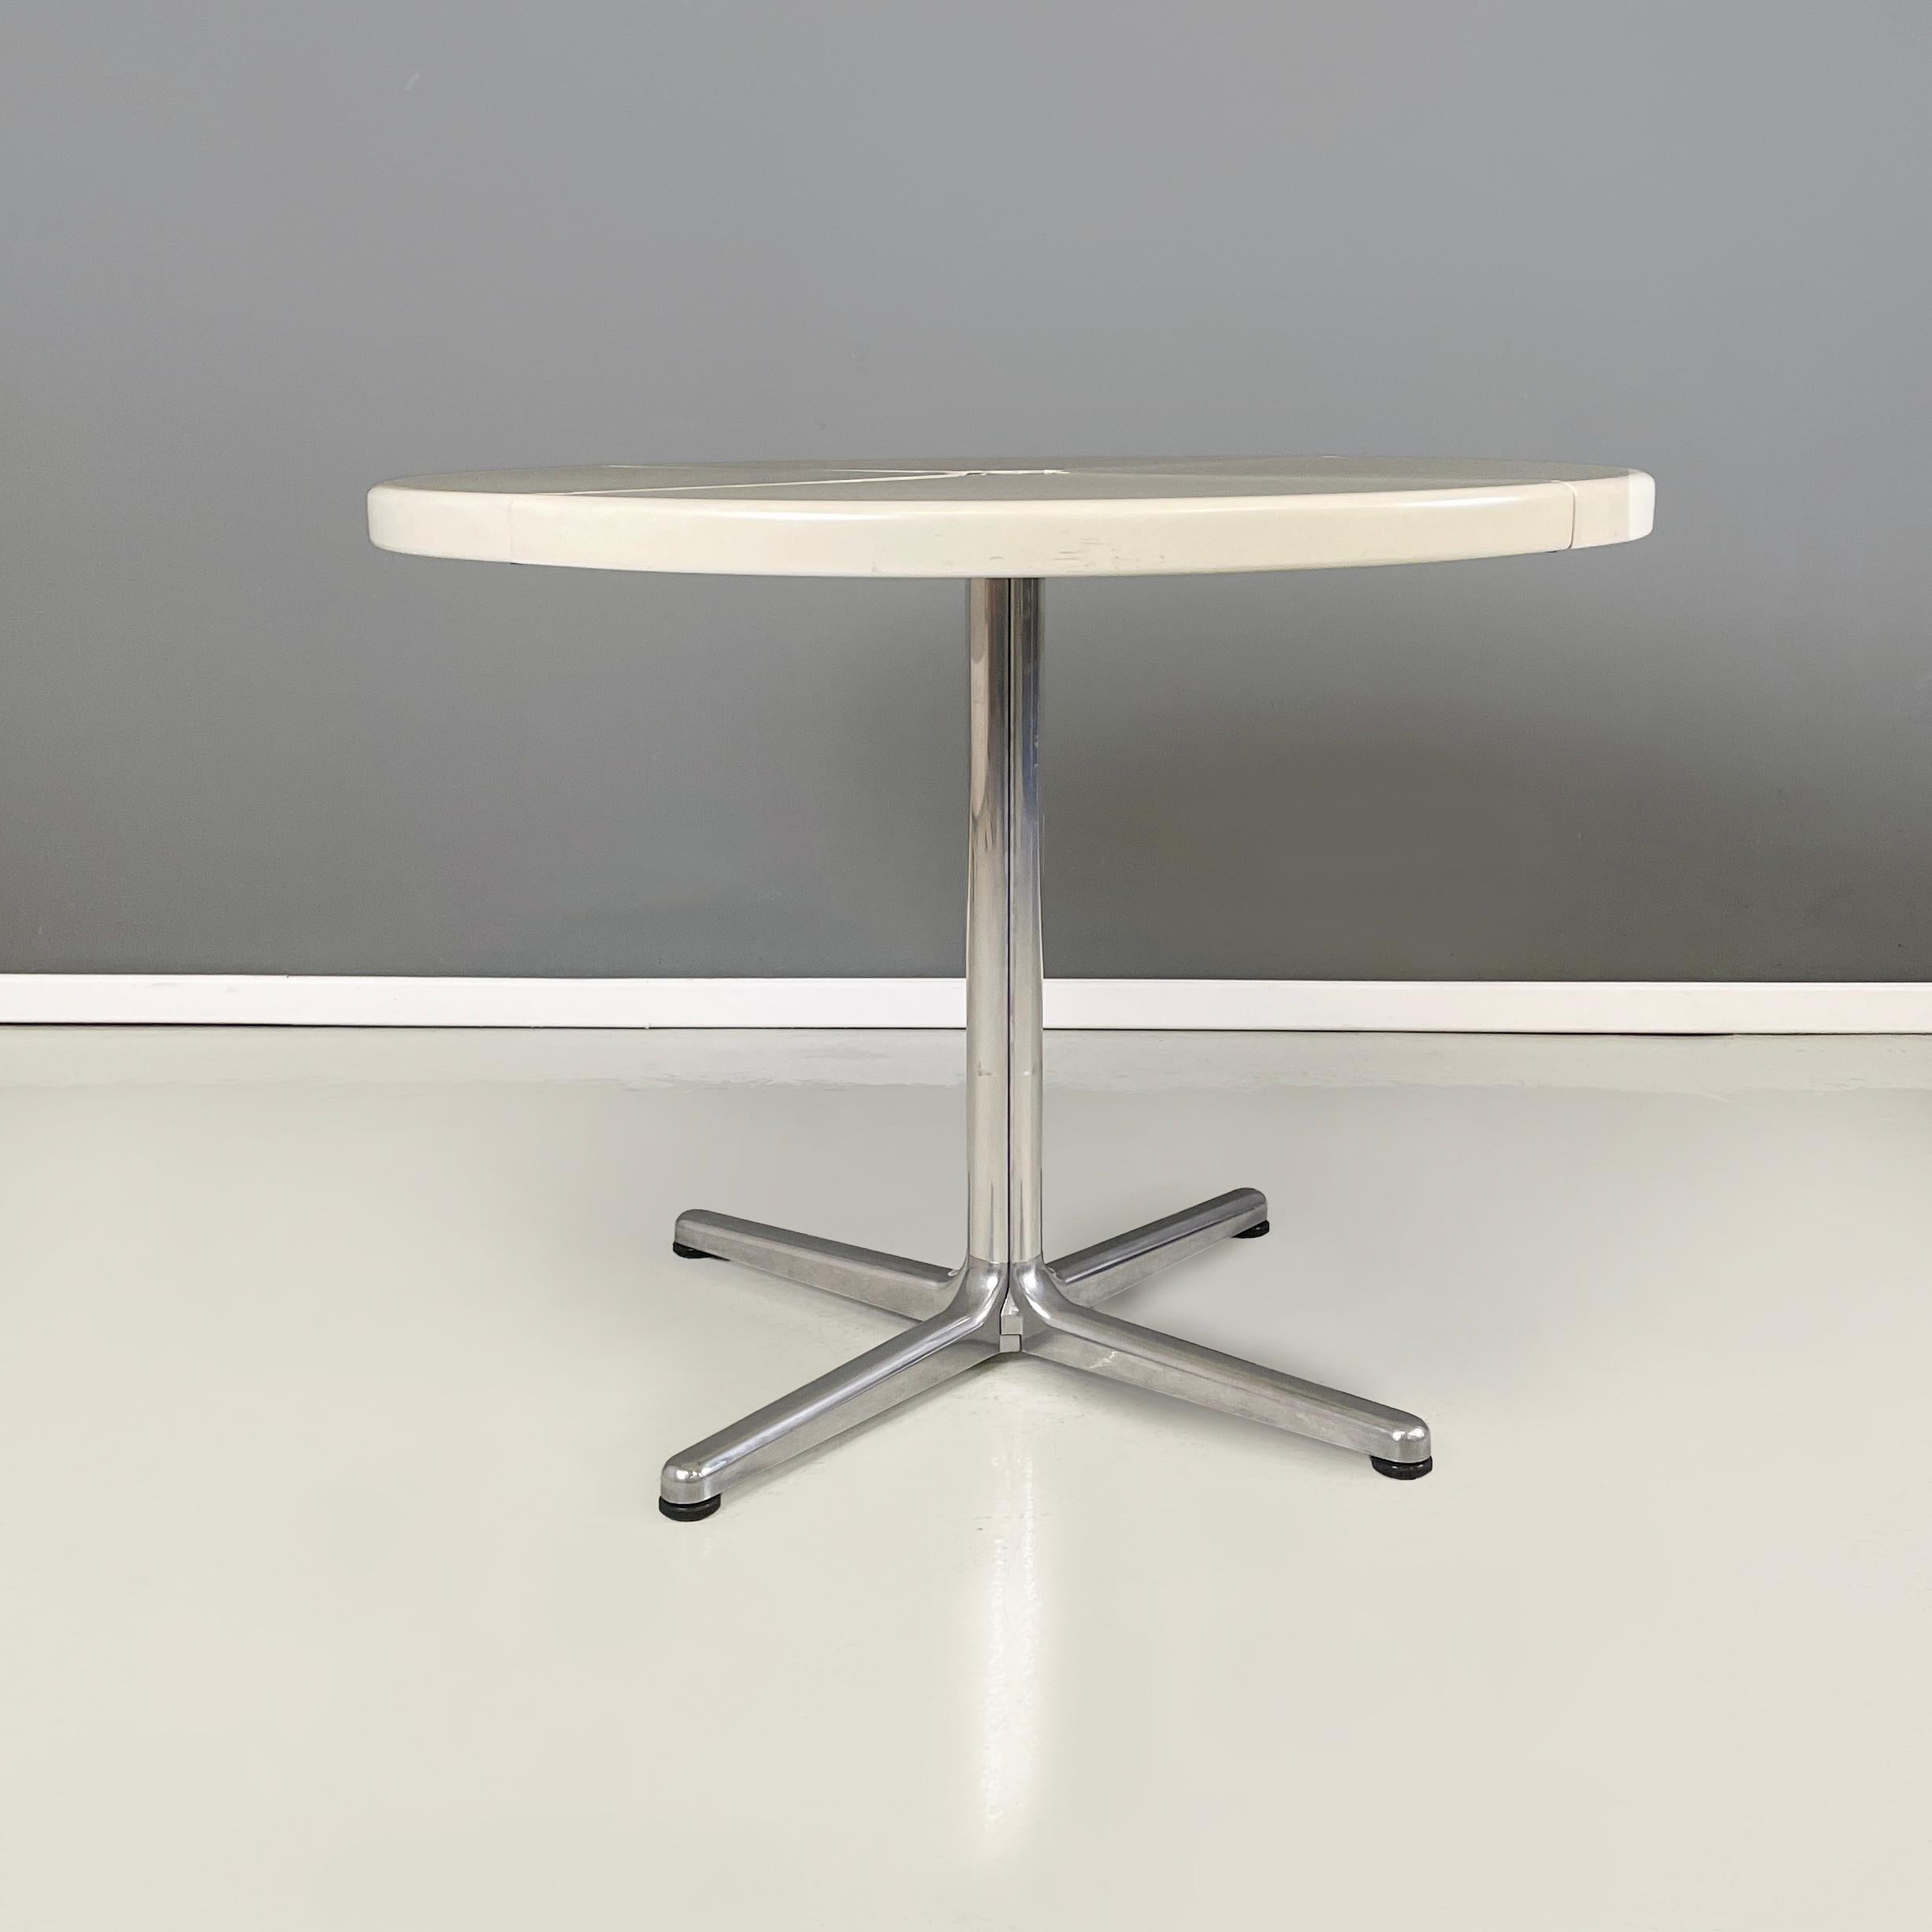 Italian modern Folding dining table Plano by Giancarlo Piretti for Anonima Castelli, 1970s
Fantastic and vintage Folding dining table mod. Plano with round white plastic top. The central structure and the 4-spoke leg are made of aluminium. The top